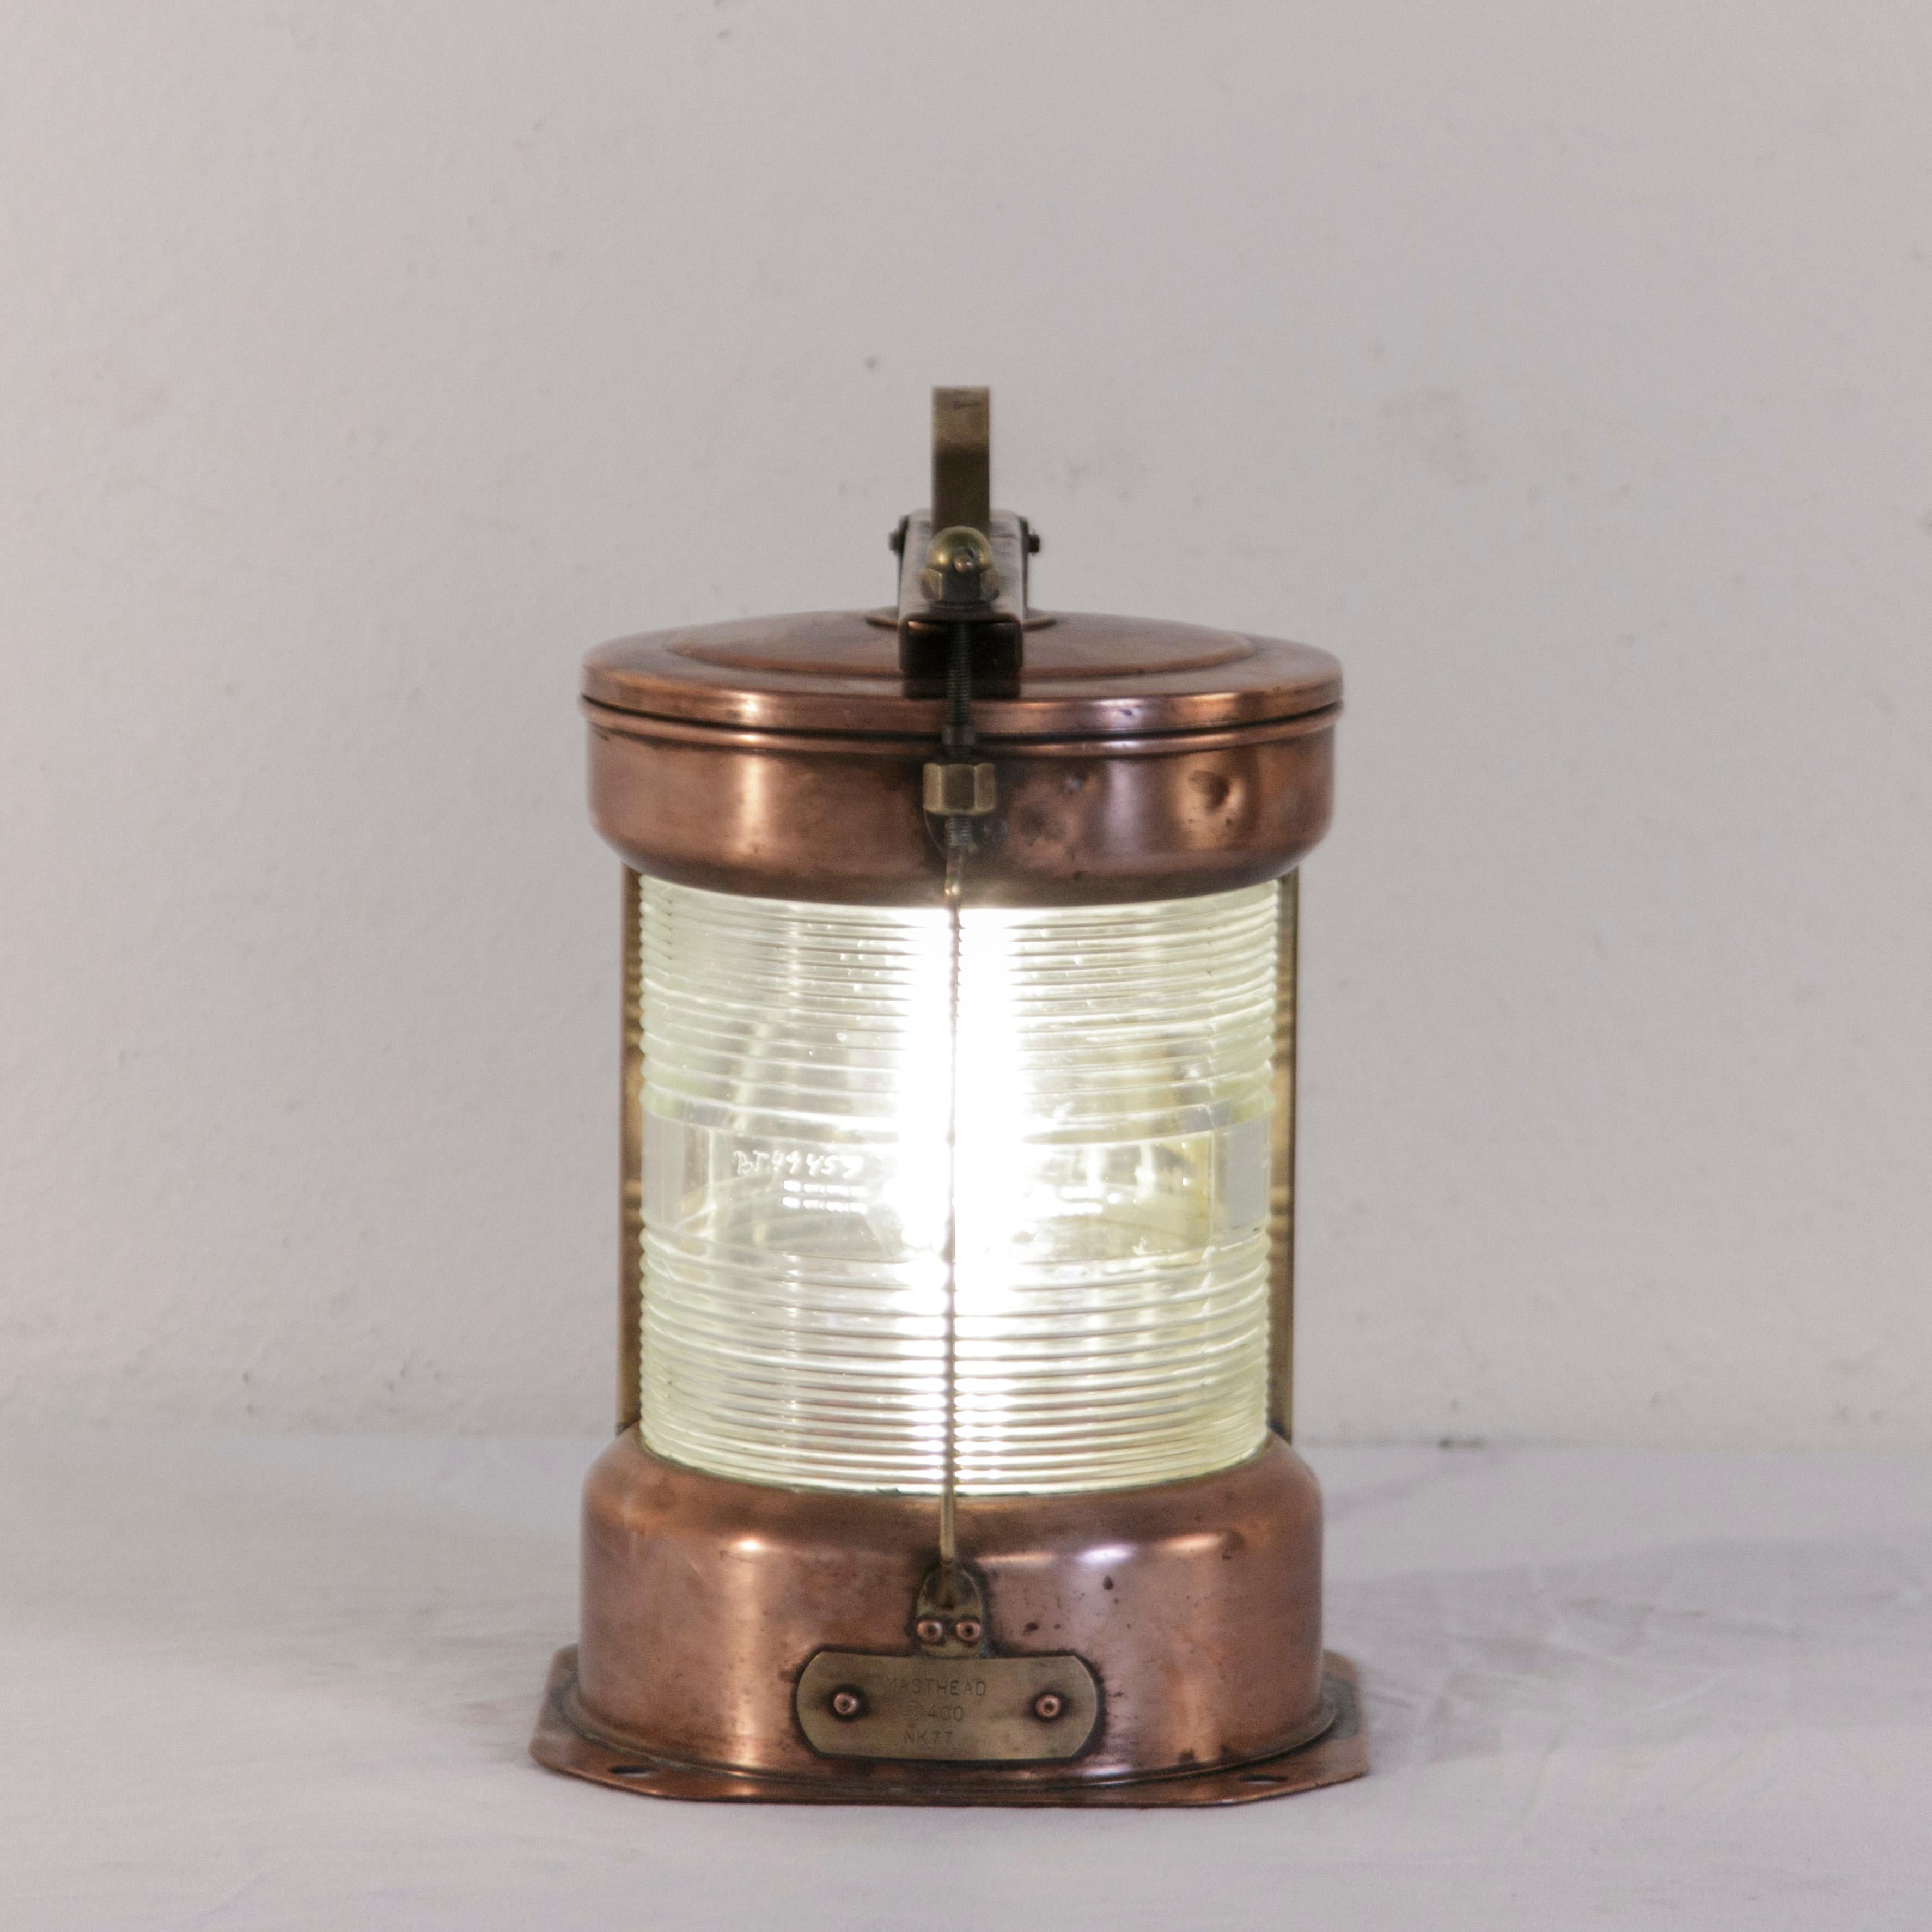 This copper marine lantern from the 20th century features a brass handle and brass label marked Masthead. The original hurricane glass is etched with the serial number BT49459. Converted into a lamp and fitted with a bayonet fit Edison light bulb,